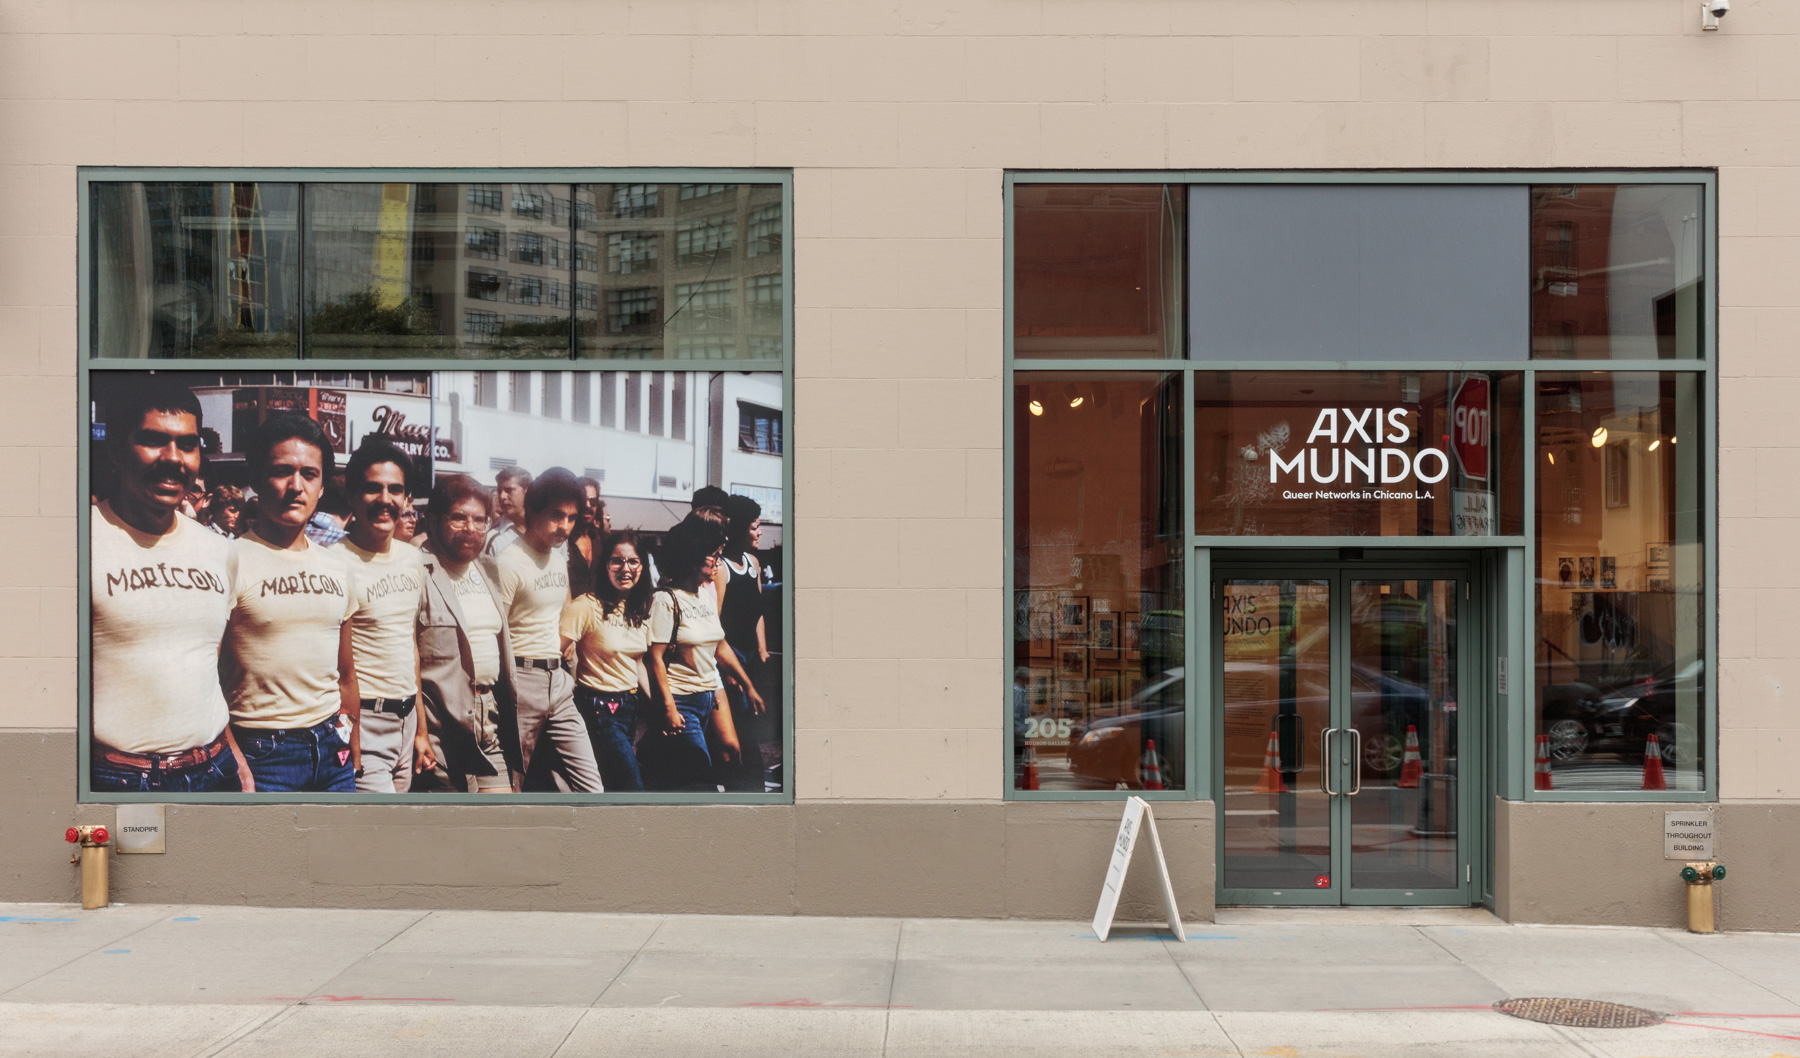  Installation view of  Axis Mundo: Queer Networks in Chicano L.A.  at 205 Hudson Gallery. Photo by Stan Narten.  